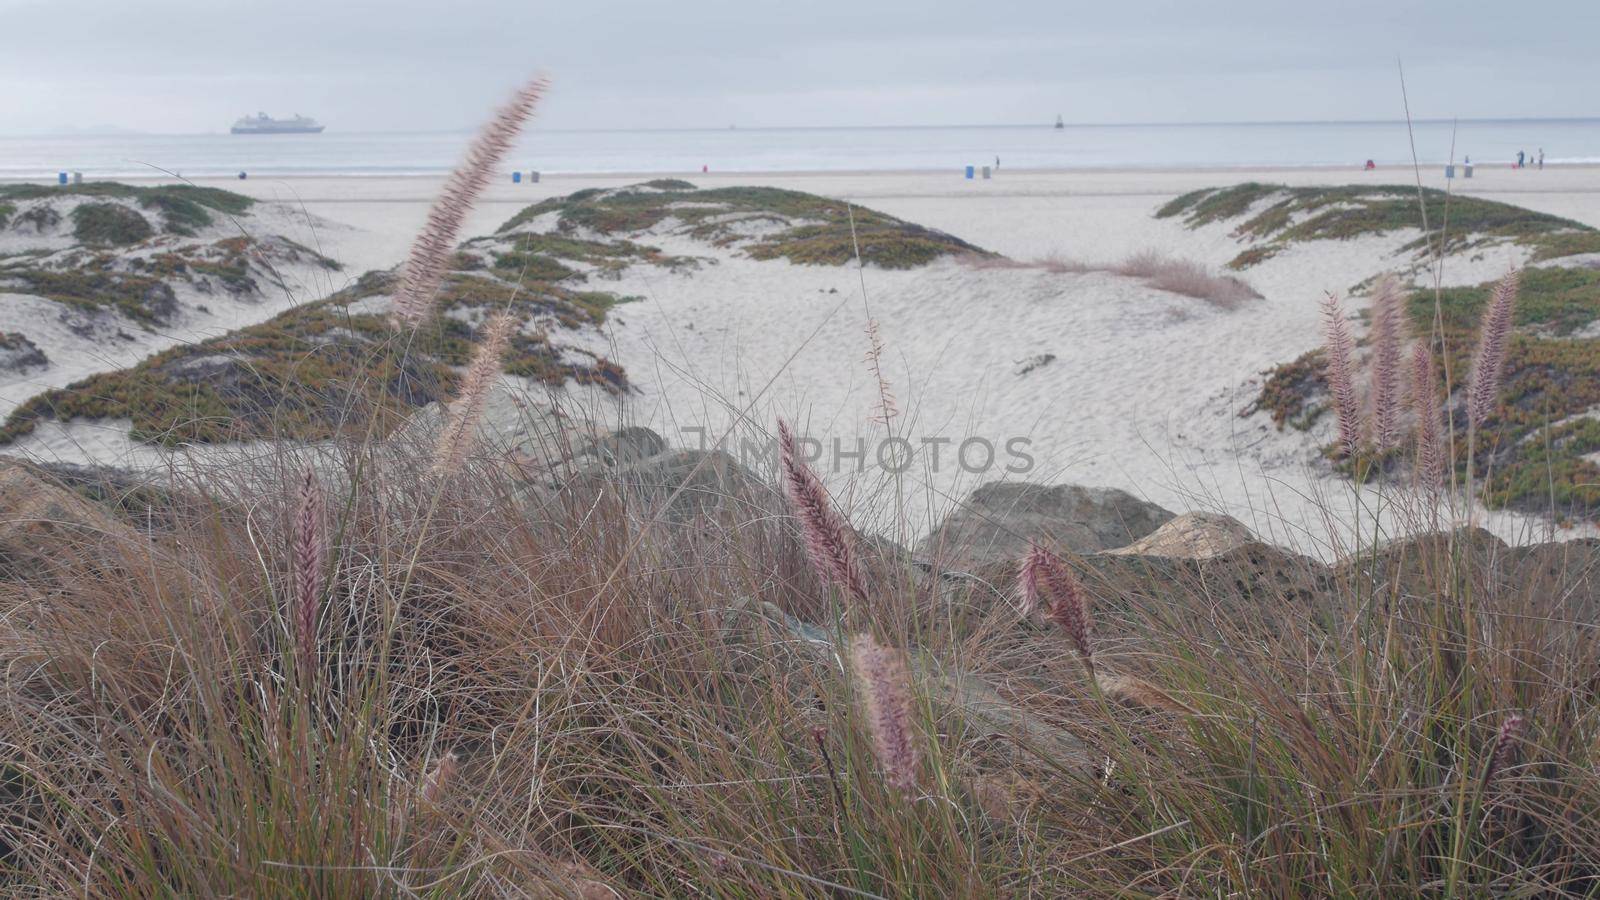 Sand dunes of misty Coronado beach, ocean waves in fog, California coast, USA. Cloudy overcast weather in San Diego. Succulent plant on calm quiet sea shore in brume, grass in haze, serenity aesthetic